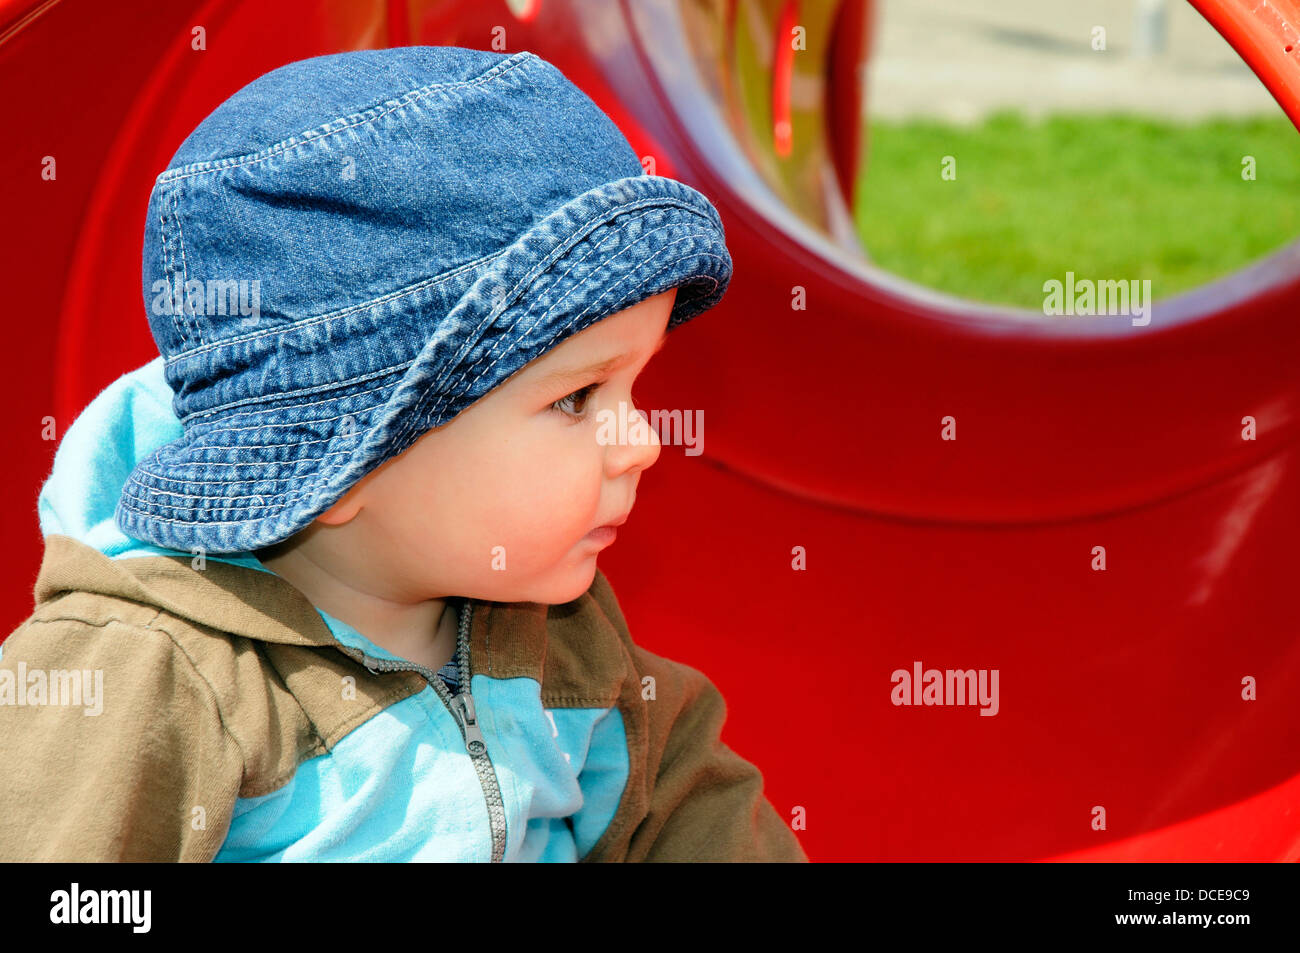 A small baby boy watching other children at play Stock Photo